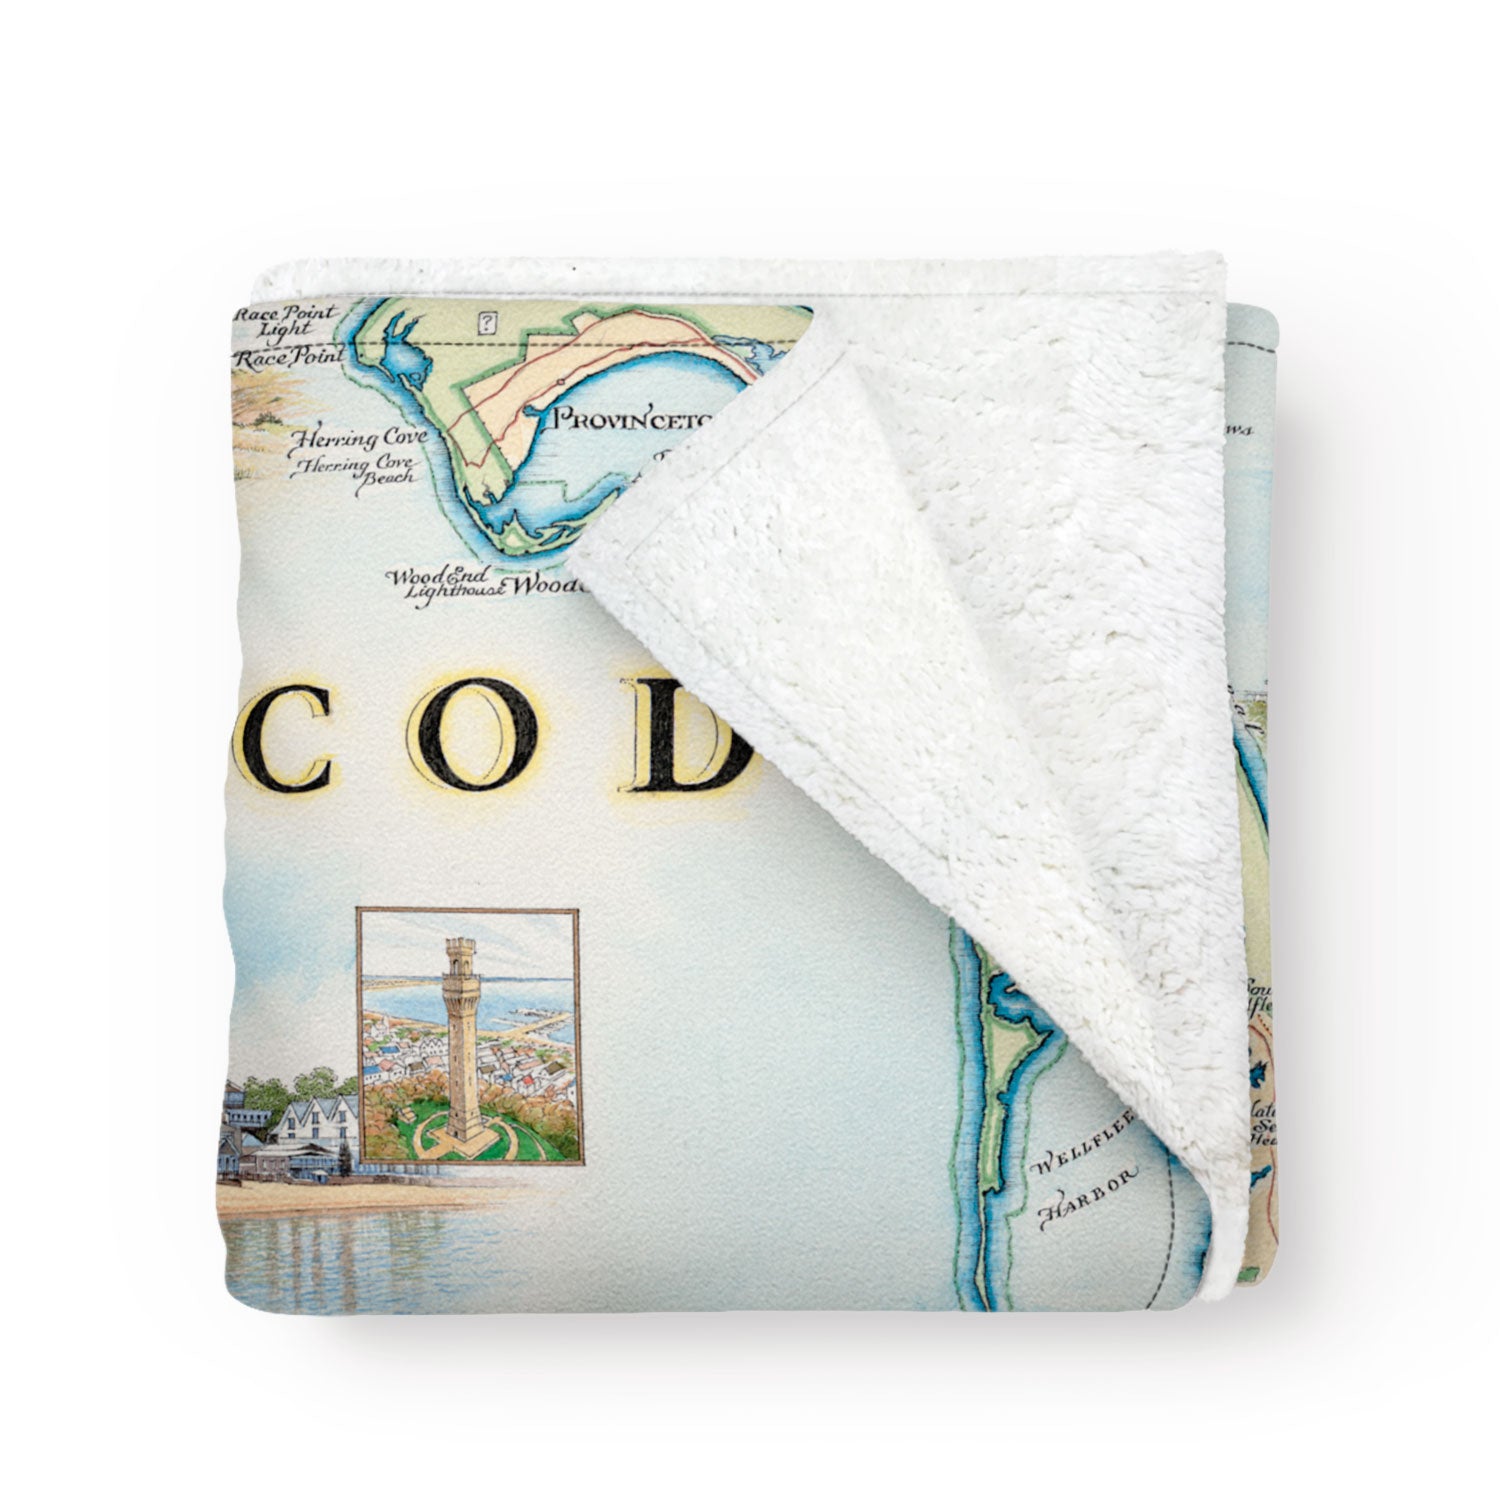 Cape Cod Map fleece blanket in earth tone colors. Featuring Plymouth Rock, fish, crane, fox, Provincetown, canoeing, biking, beach, lighthouse, and ocean. Measures 50